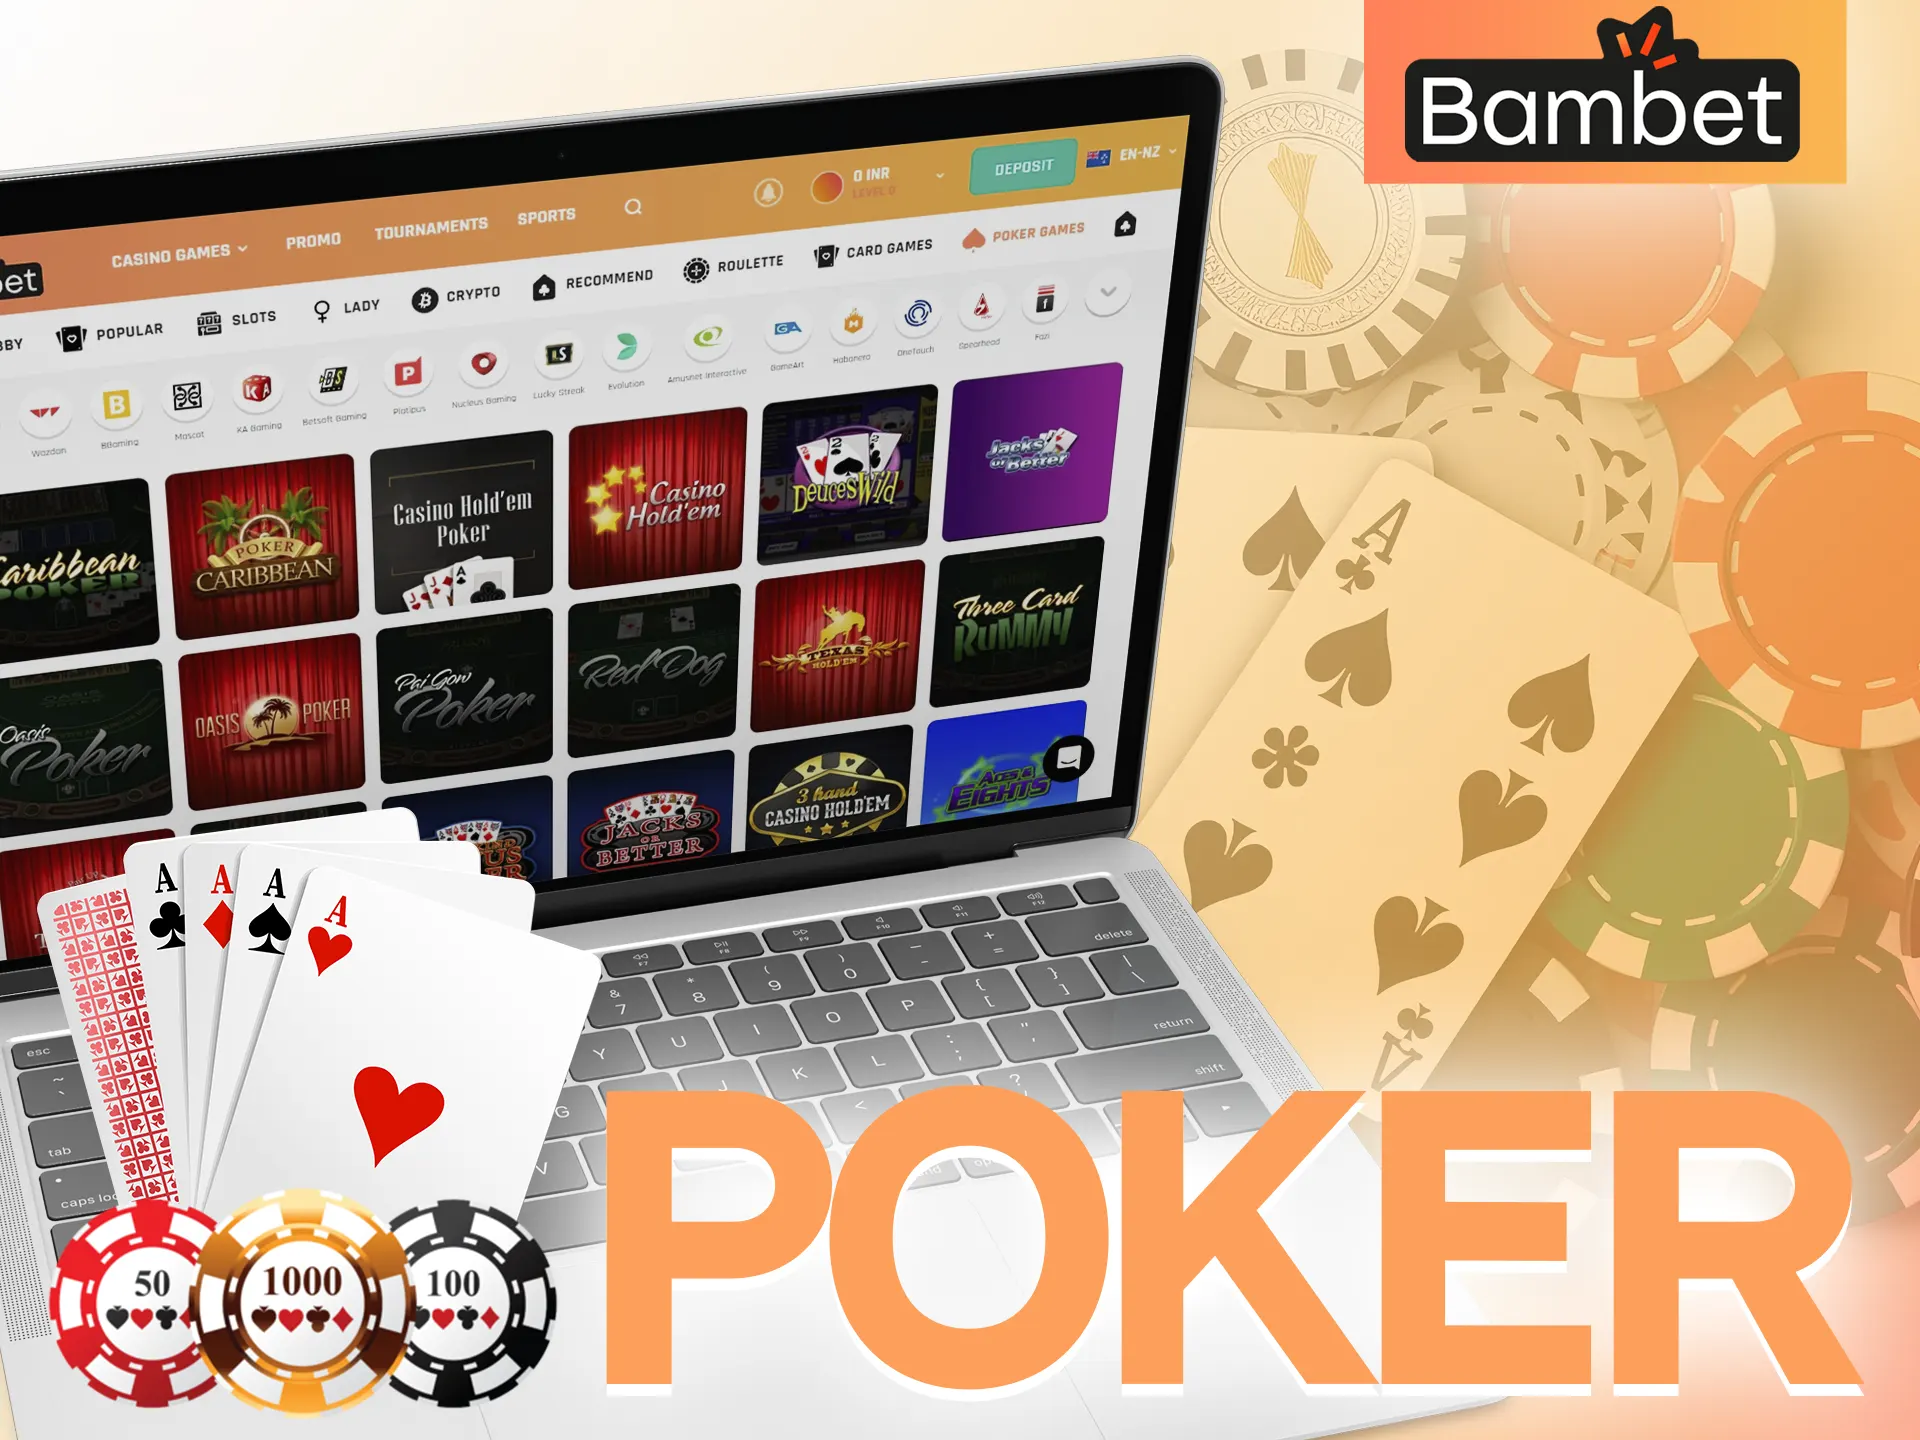 Play your favorite poker game on Bambet.